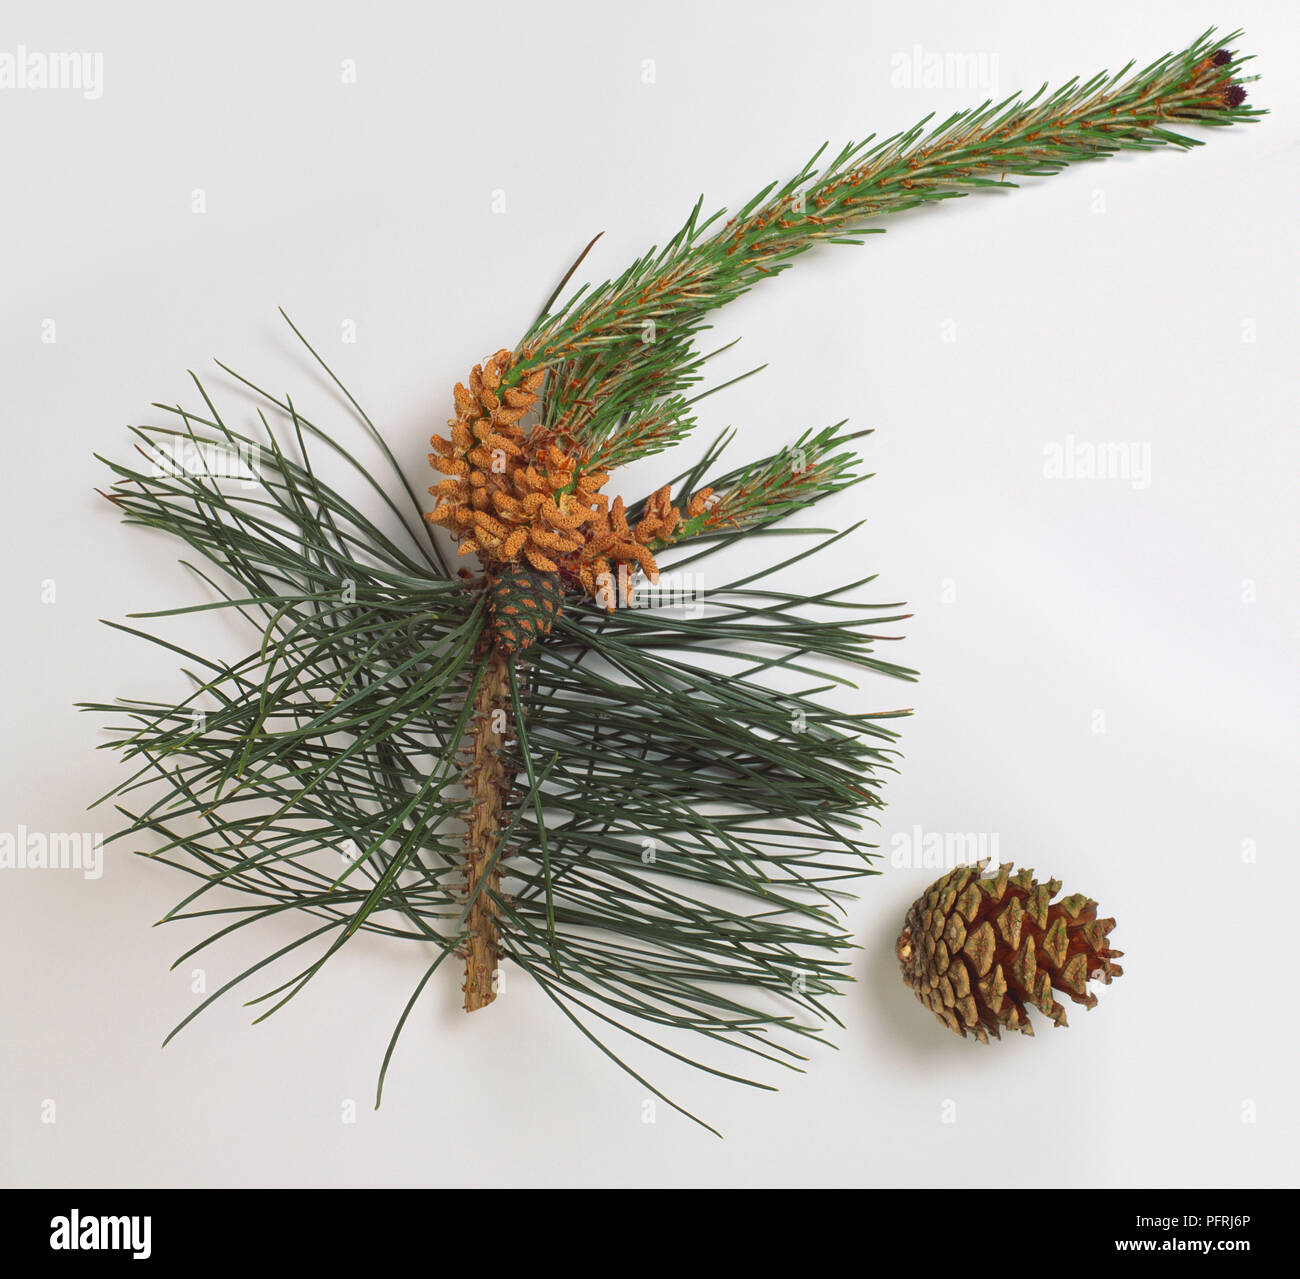 Pinus tabuliformis (Chinese pine), stem with green leaves and flower clusters, and brown cone. Stock Photo